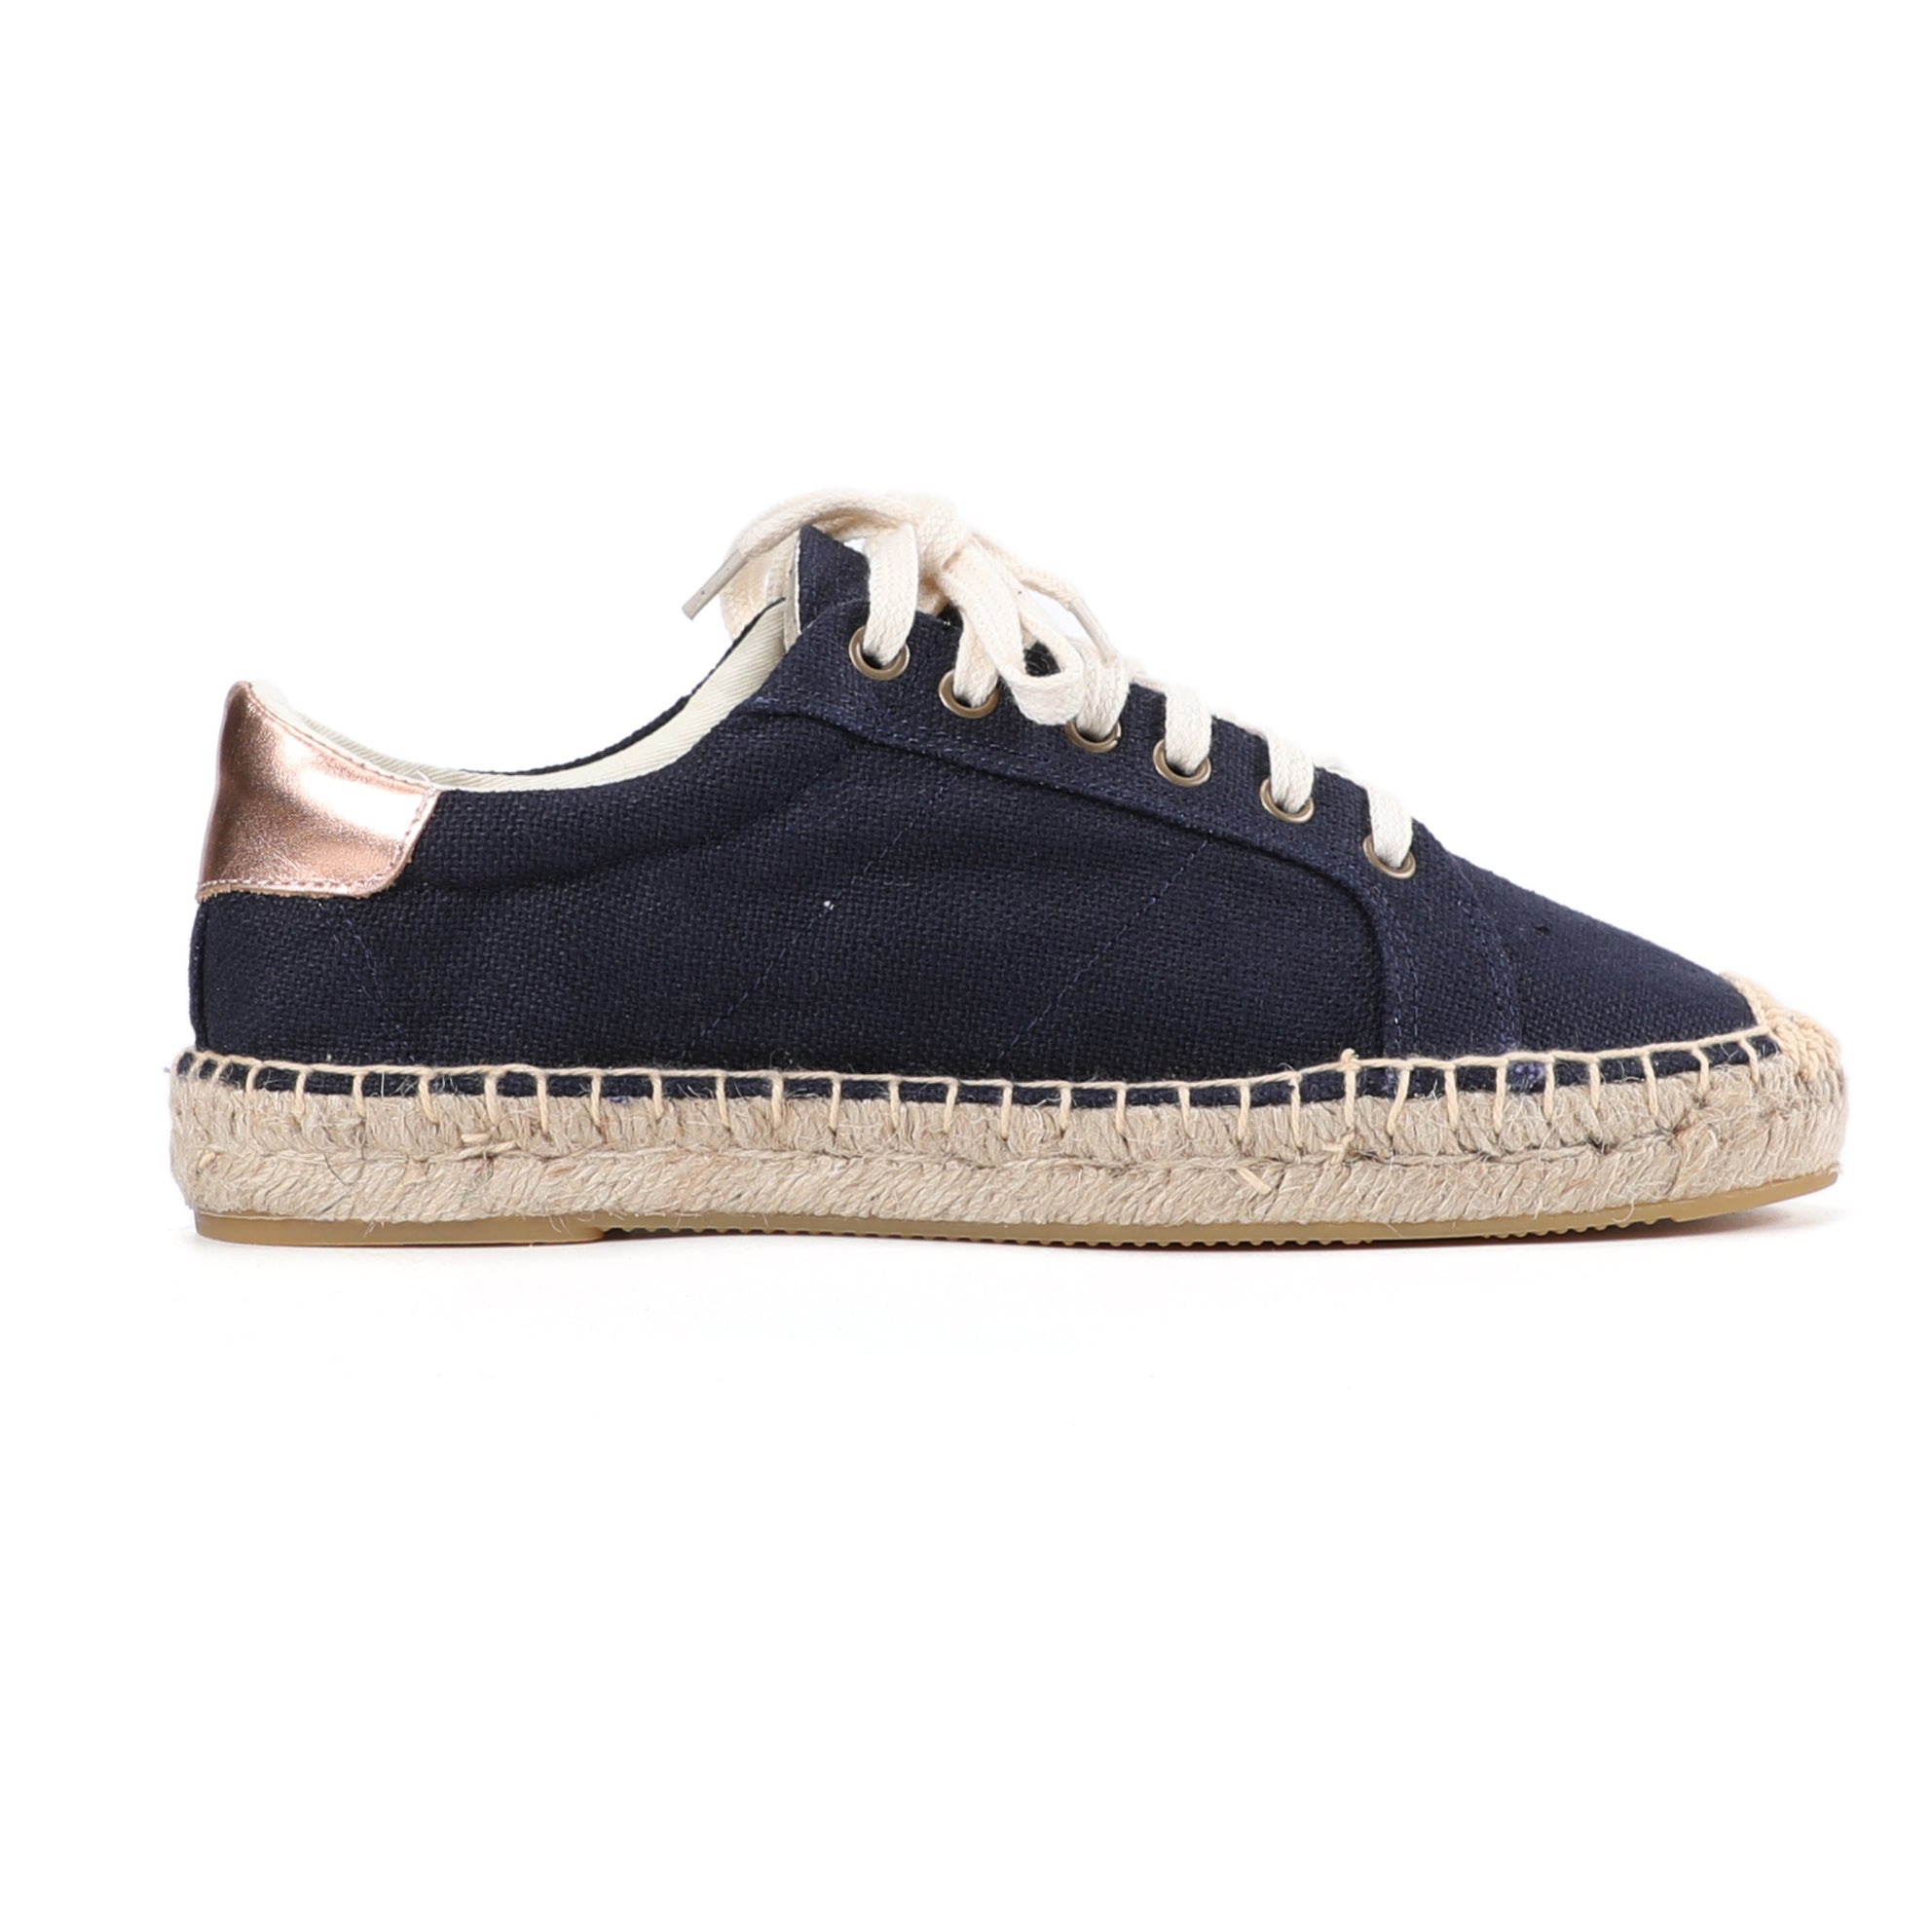 Espadrilles Casual Platform Sneakers 2021 Real Sapatos Tienda Soludos Women'S Lace-Up Sewing Wedges Shoes For Flat Round Hemp 